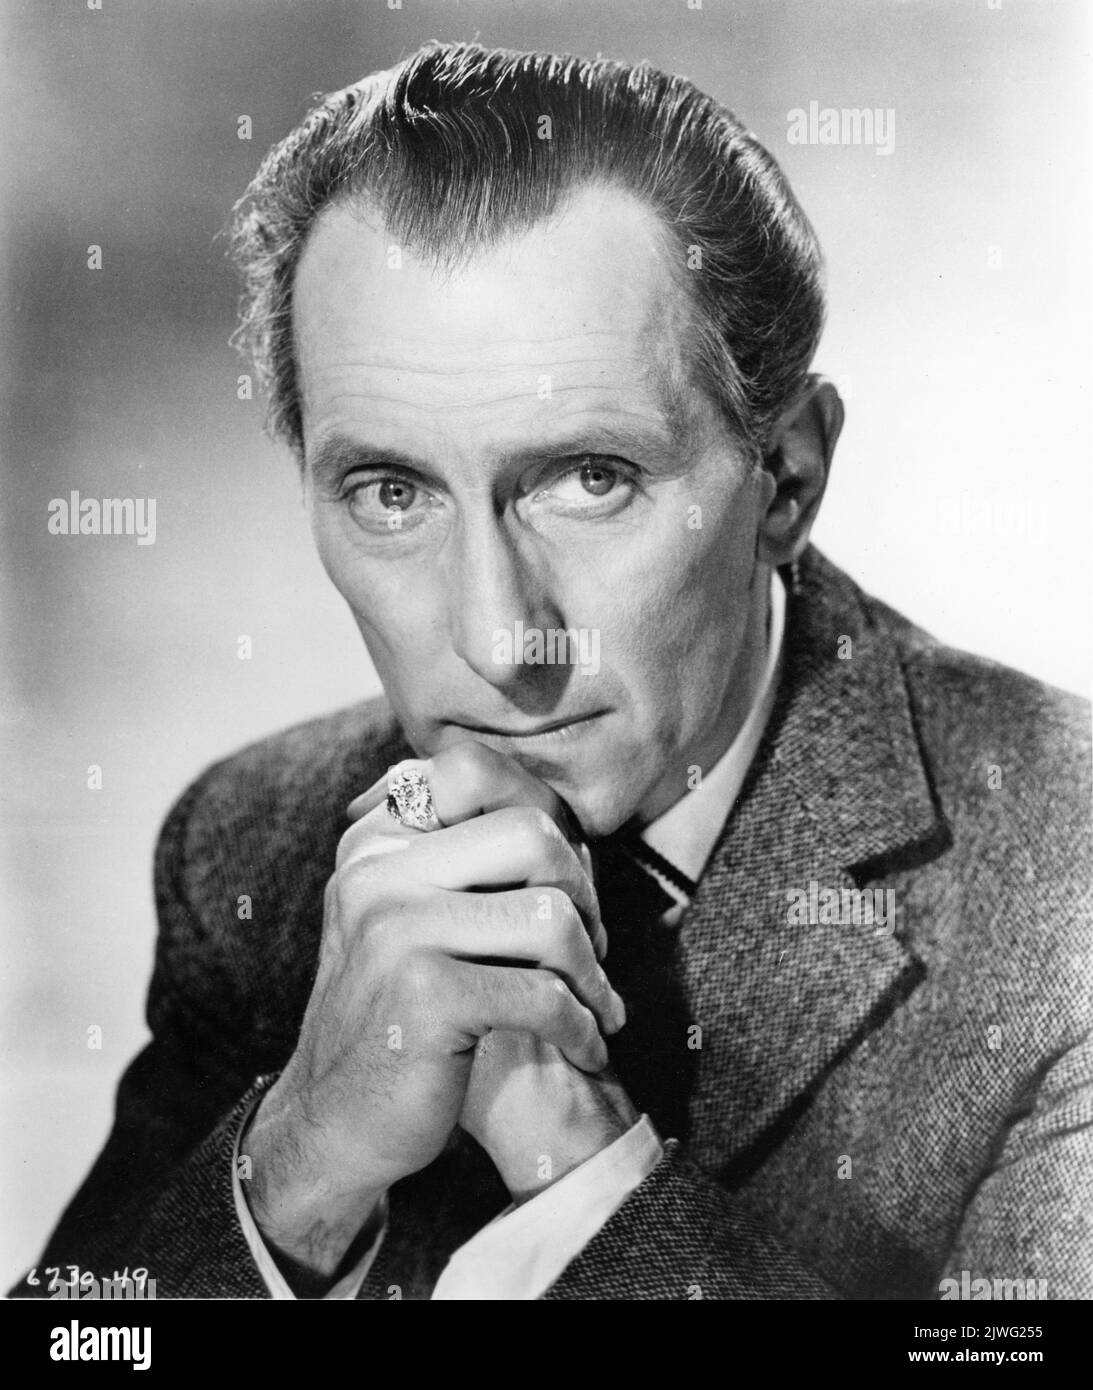 PETER CUSHING Portrait as Doctor / Professor Abraham Van Helsing in THE BRIDES OF DRACULA 1960 director TERENCE FISHER Hammer Films / Rank Film Distributors (UK) / Universal Pictures (US) Stock Photo